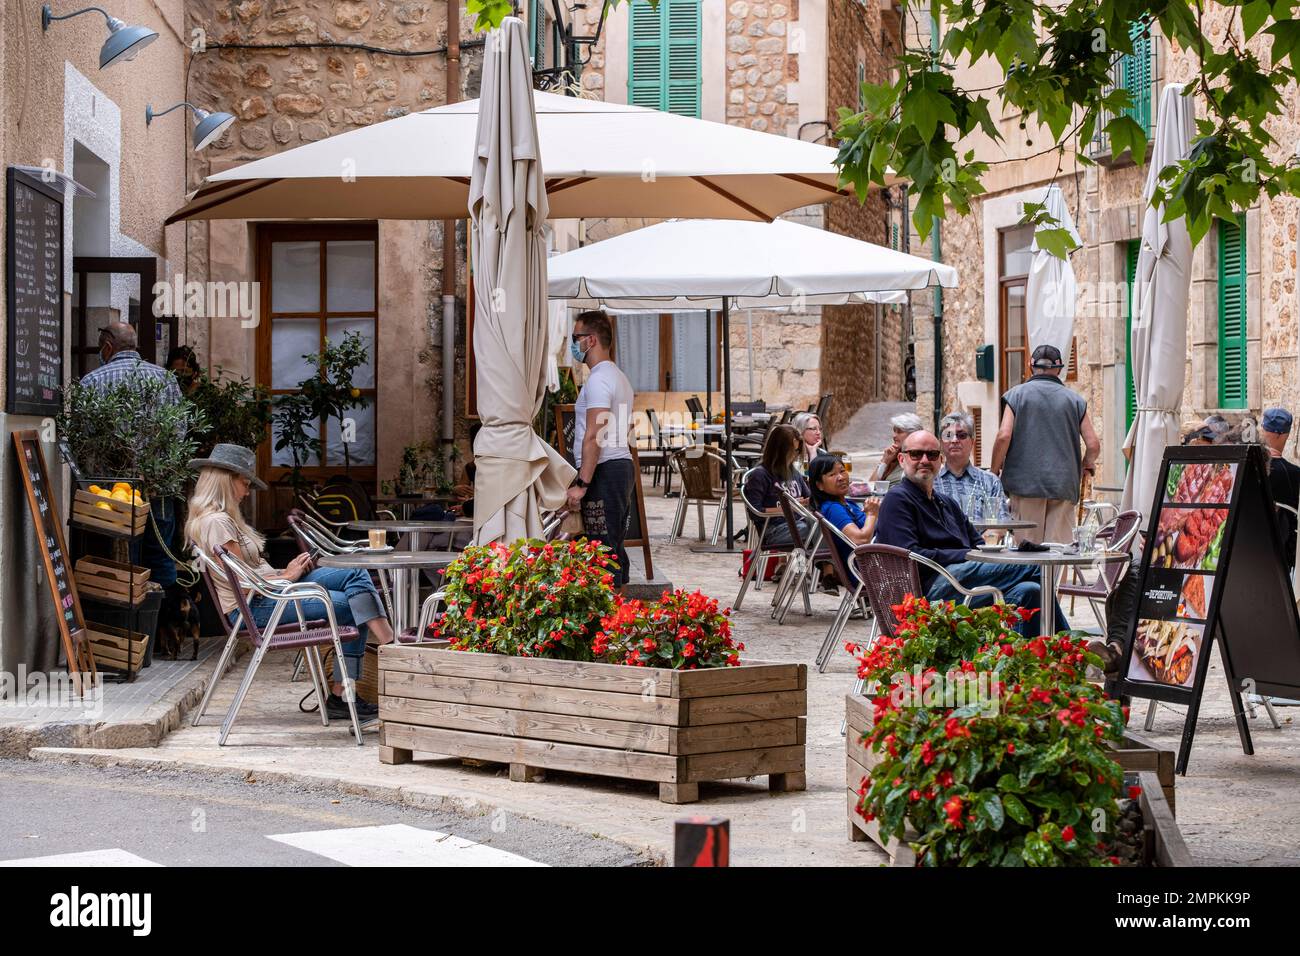 Fornalutx, Soller valley route, Mallorca, Balearic Islands, Spain Stock Photo